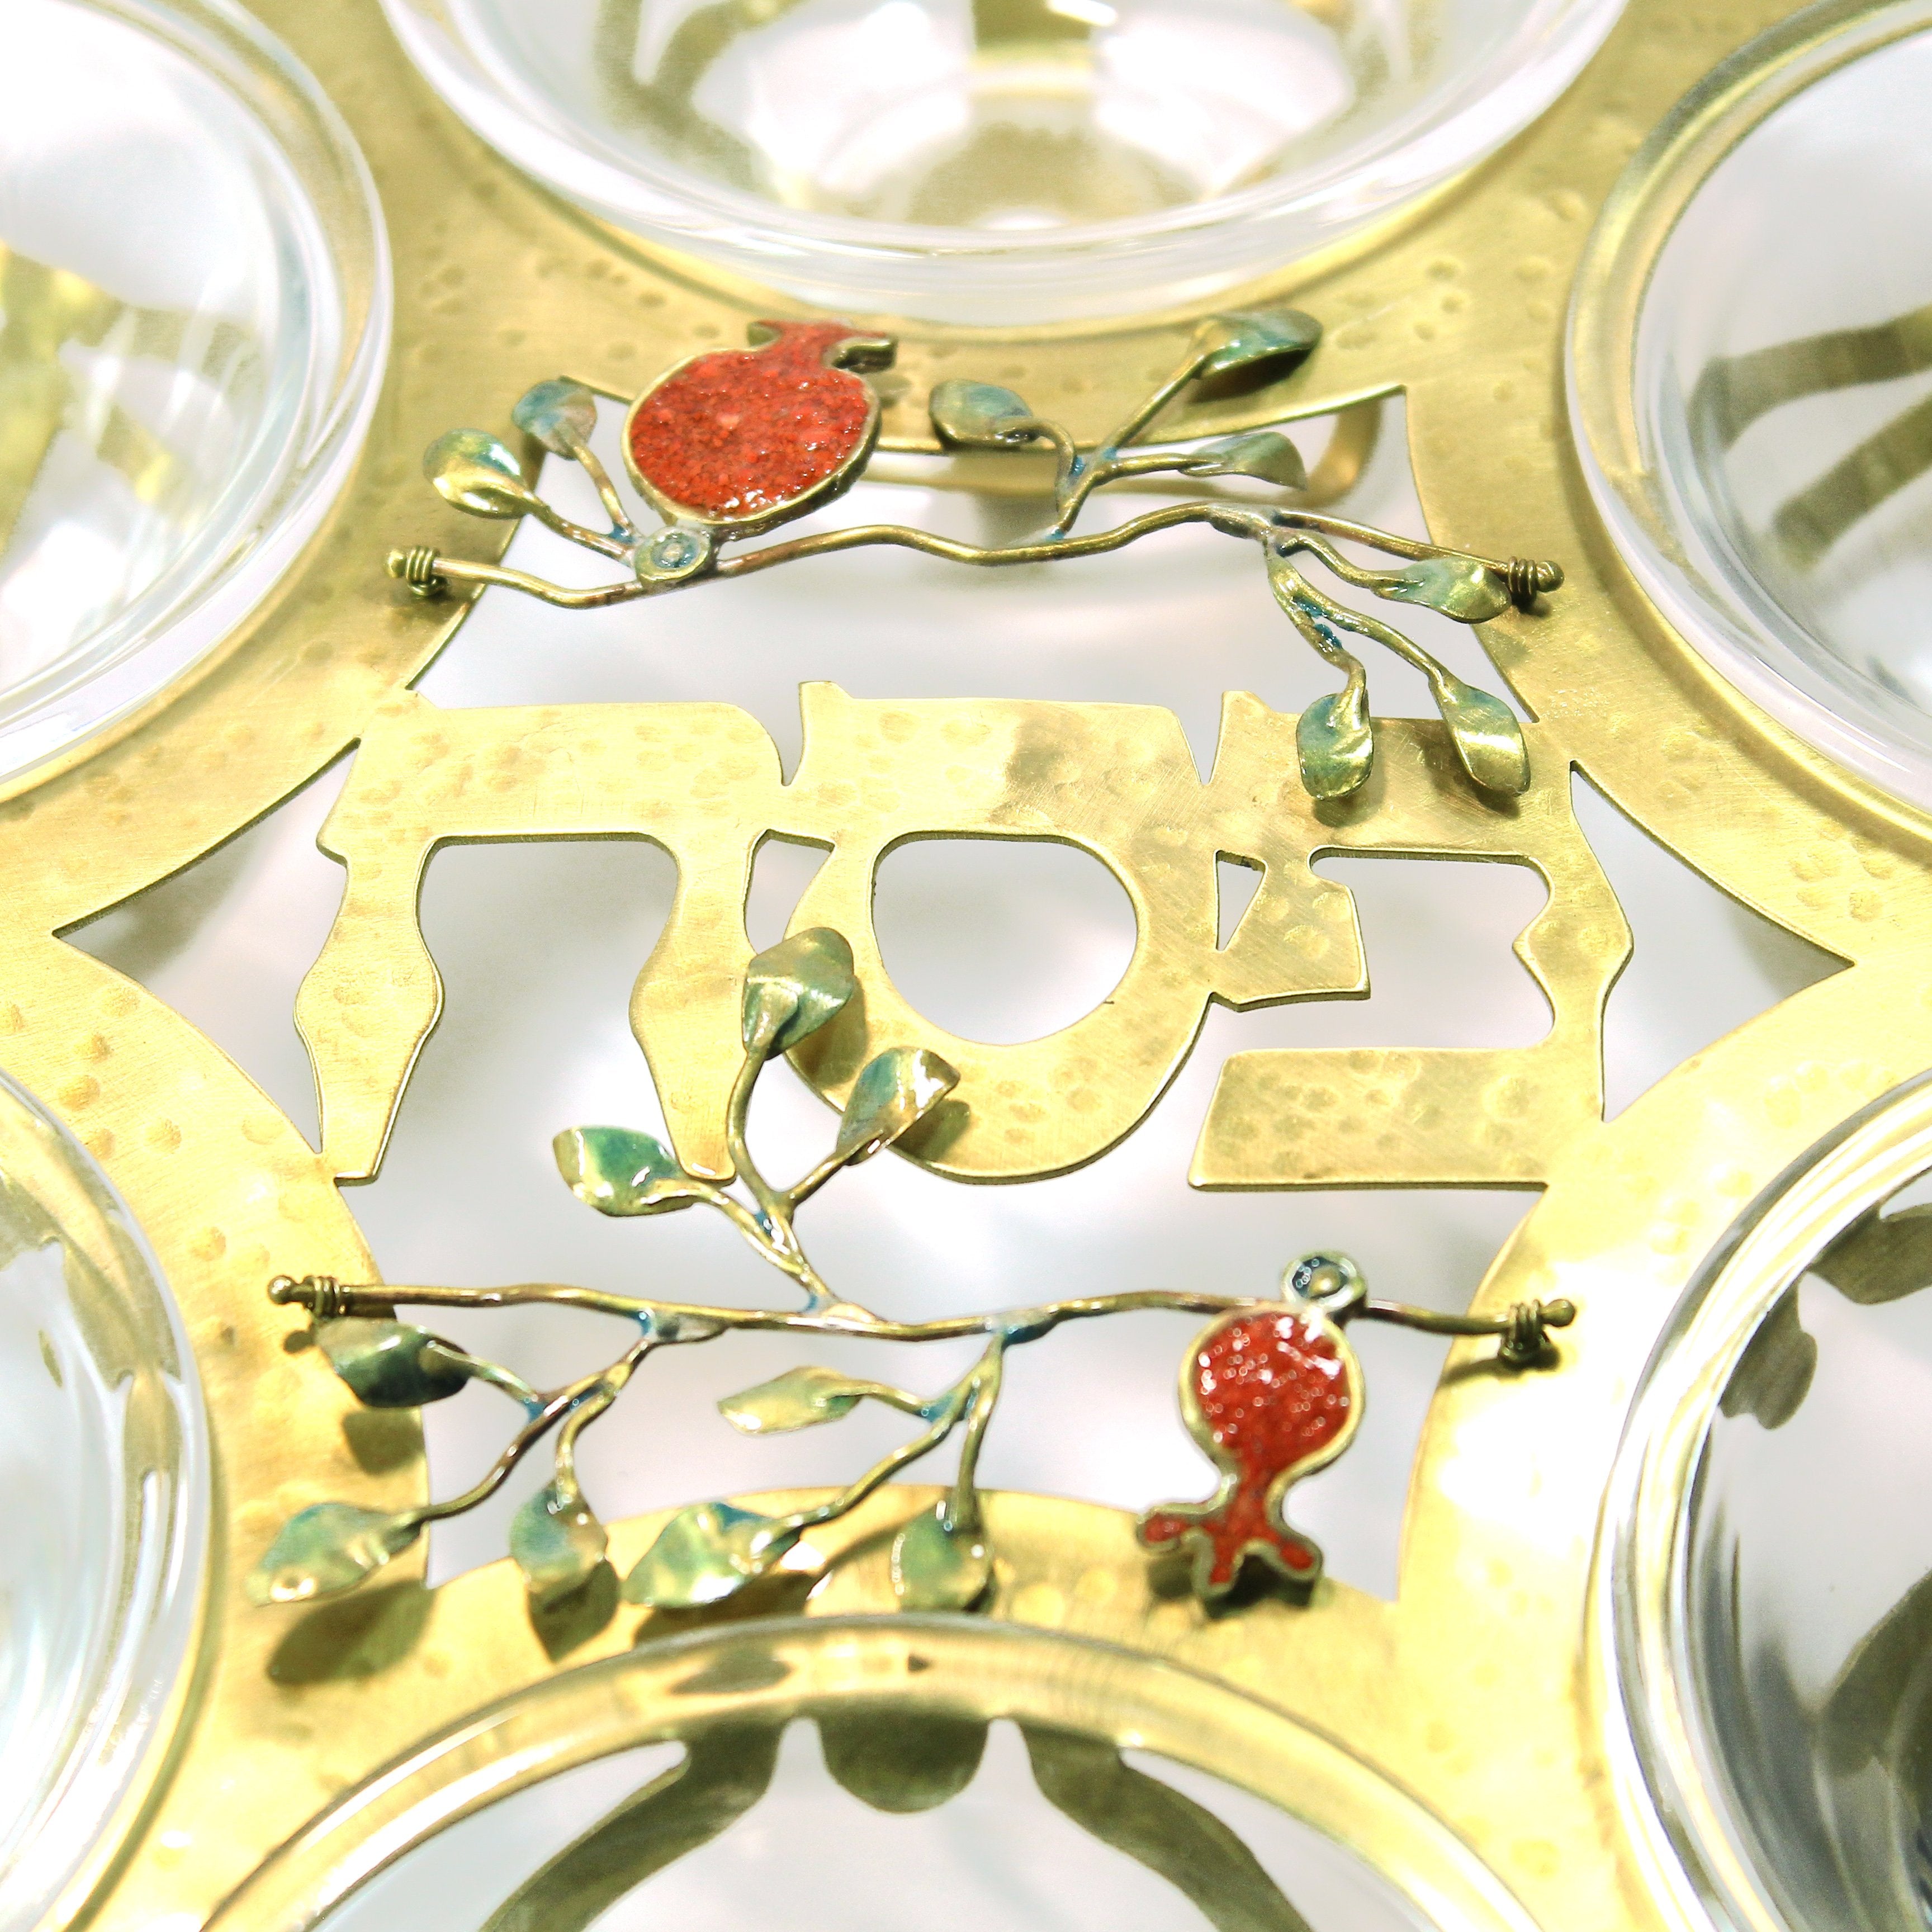 Pomegranate - Metal Passover Seder Plate - Shulamit Kanter Official Store